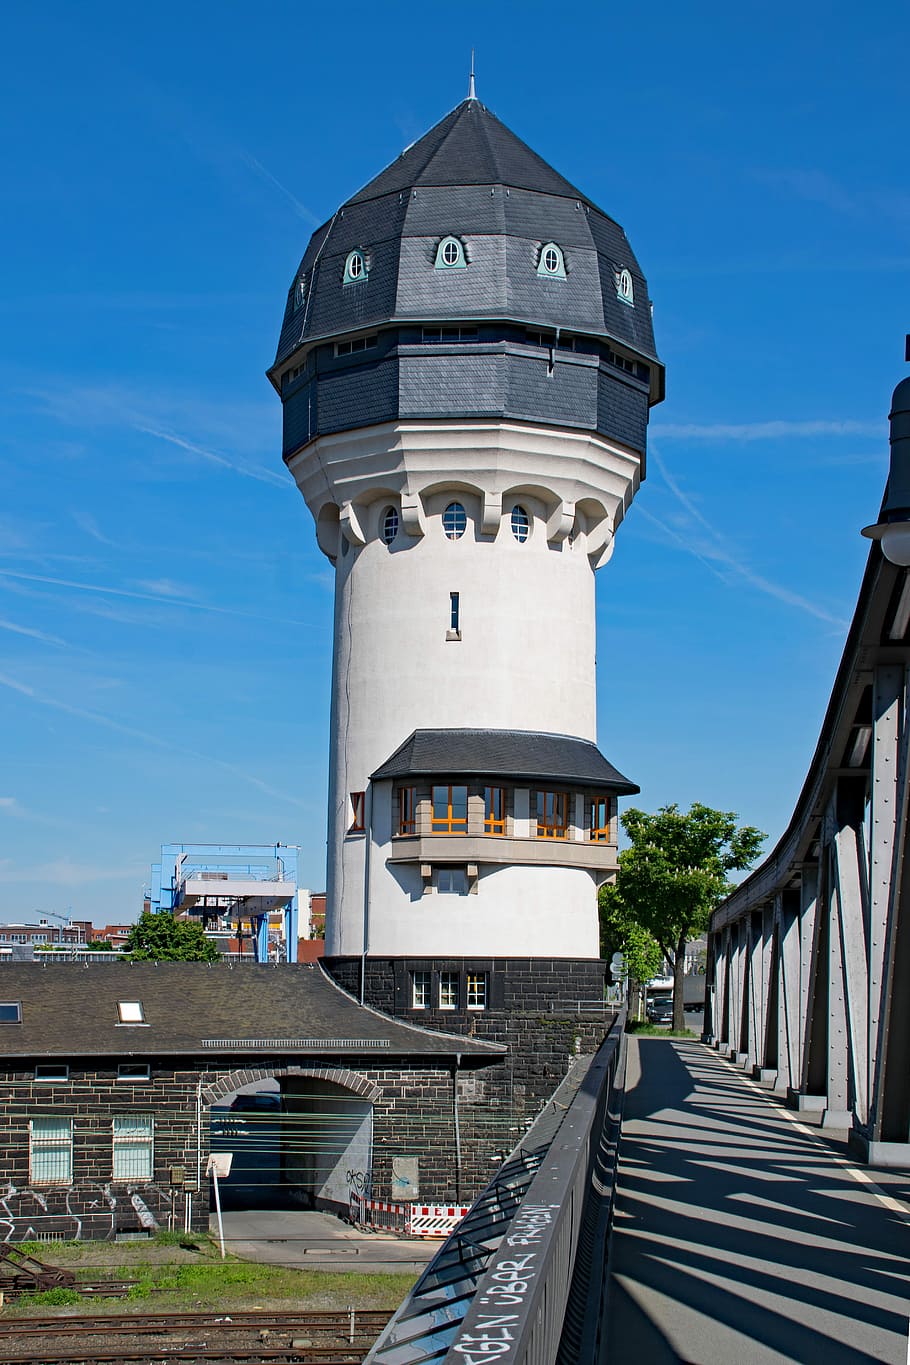 Darmstadt, Hesse, Germany, central station, water tower, bridge